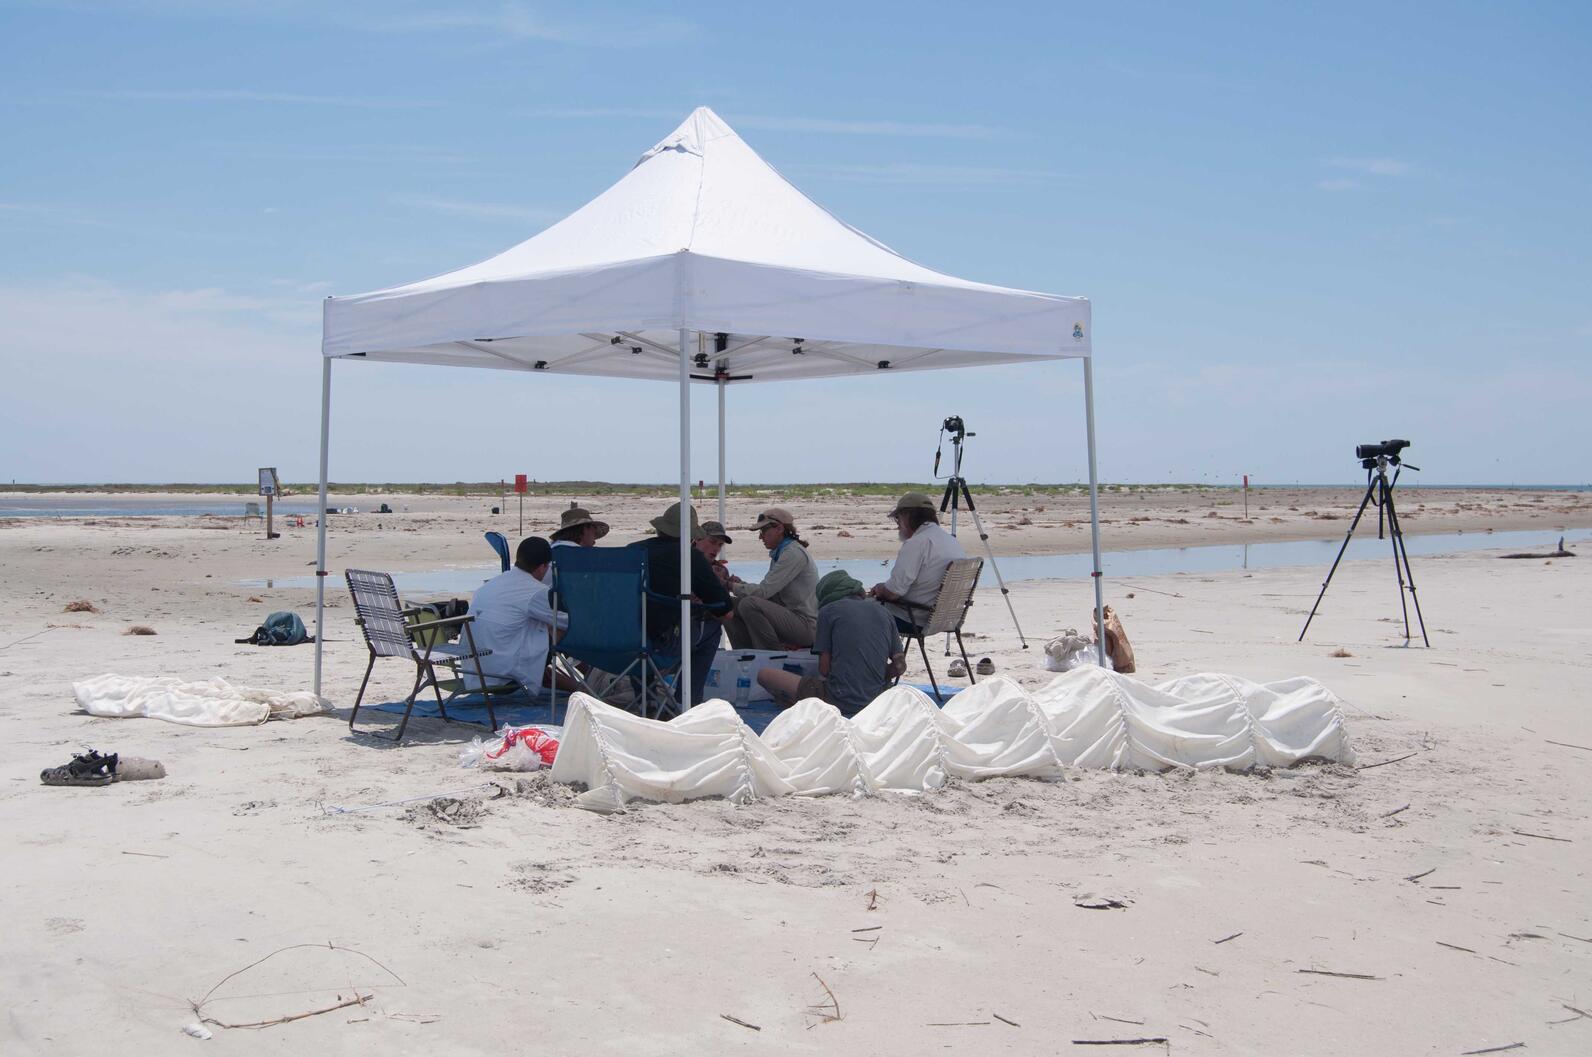 People under a shade tent on a beach with research instruments.